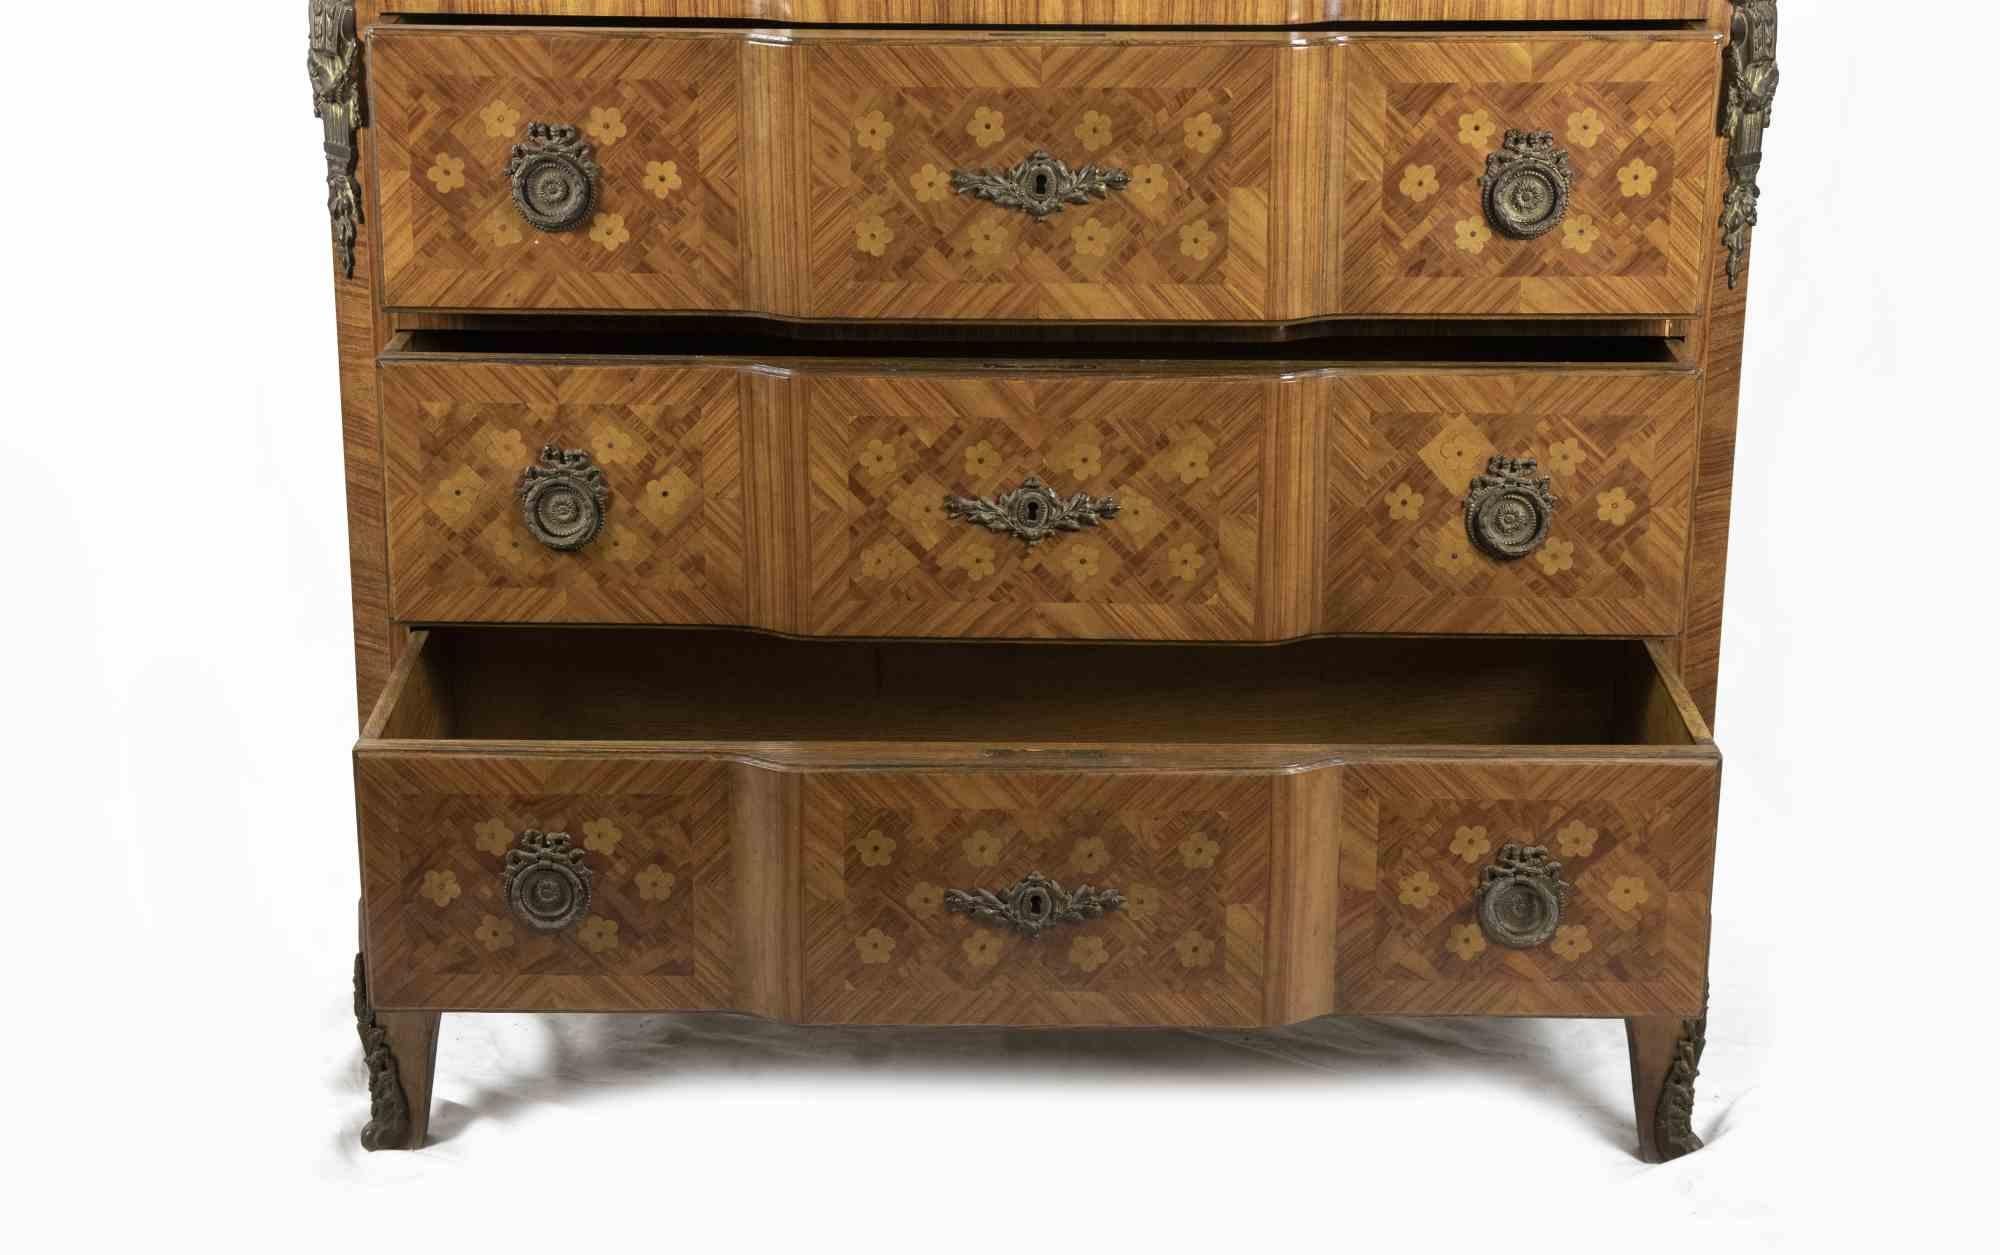 Drawer is an original design furniture item realized by Italian Manufacturer in 18th century.

French chest of drawers in wood entirely inlaid with geometric motifs, with trimmings and friezes in gilded and chiseled bronze.

Consisting of three